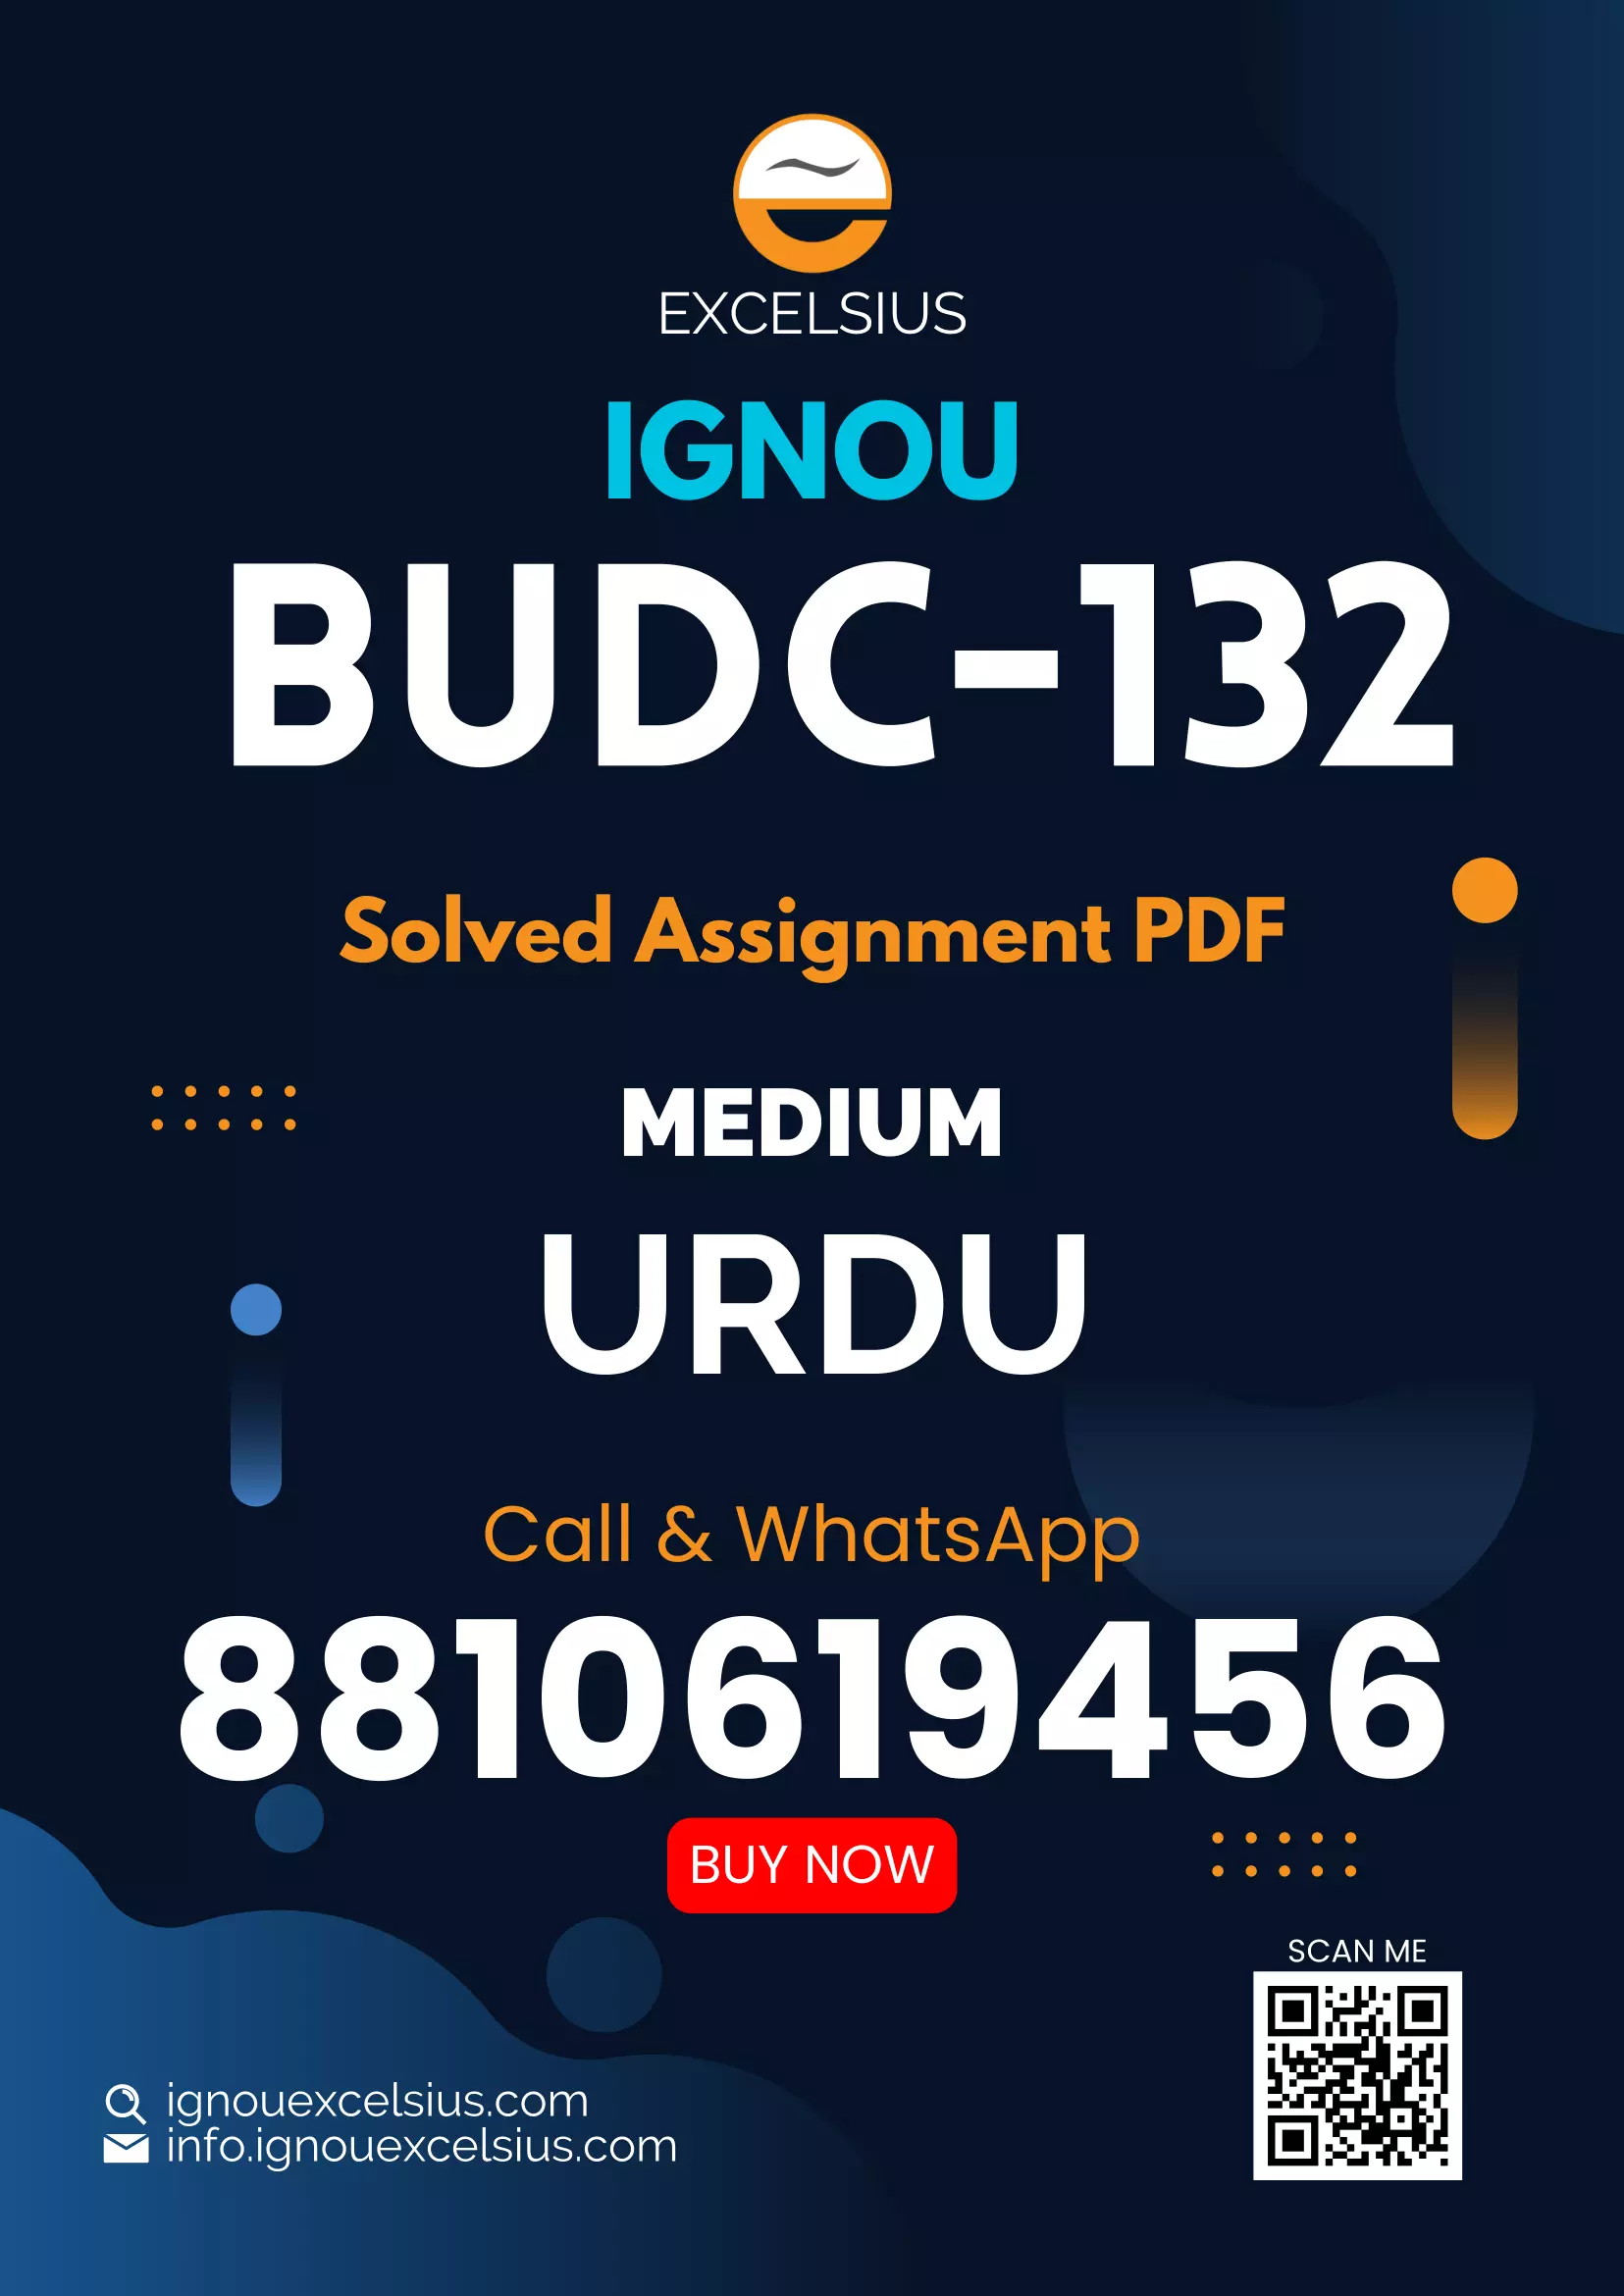 IGNOU BUDC-132 - Study of Urdu Classical Ghazal, Latest Solved Assignment-July 2022 - January 2023